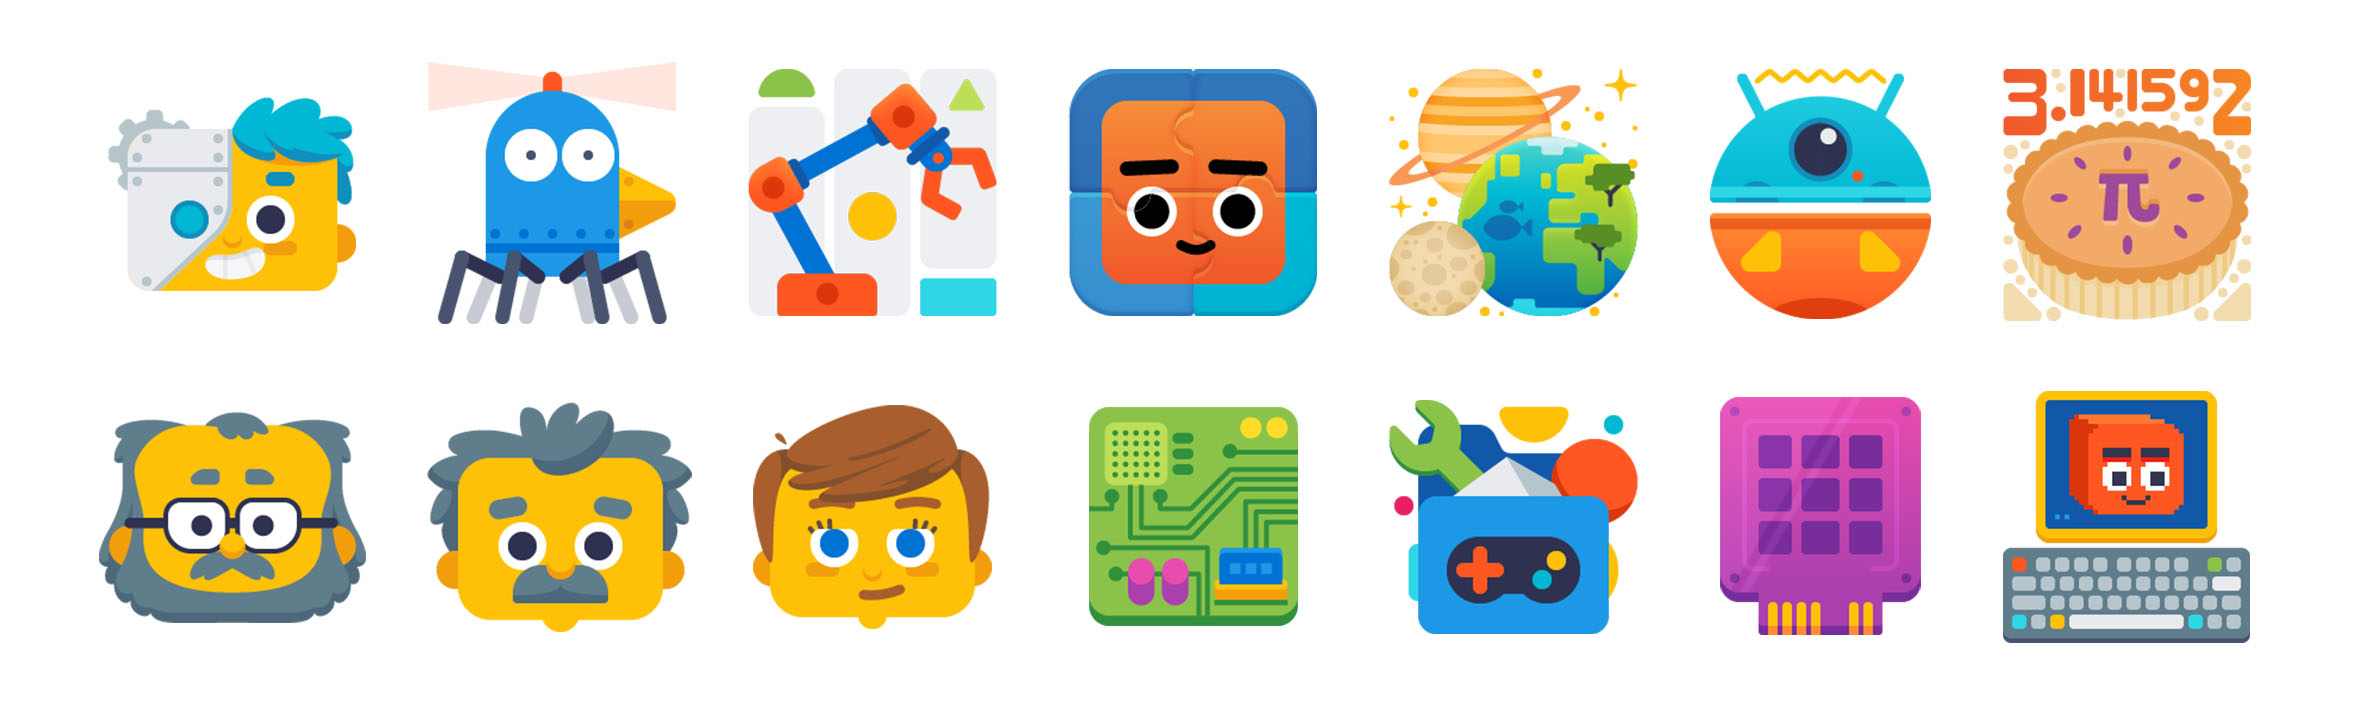 Emojis, icons, and badges for kids. Computer science and robotics